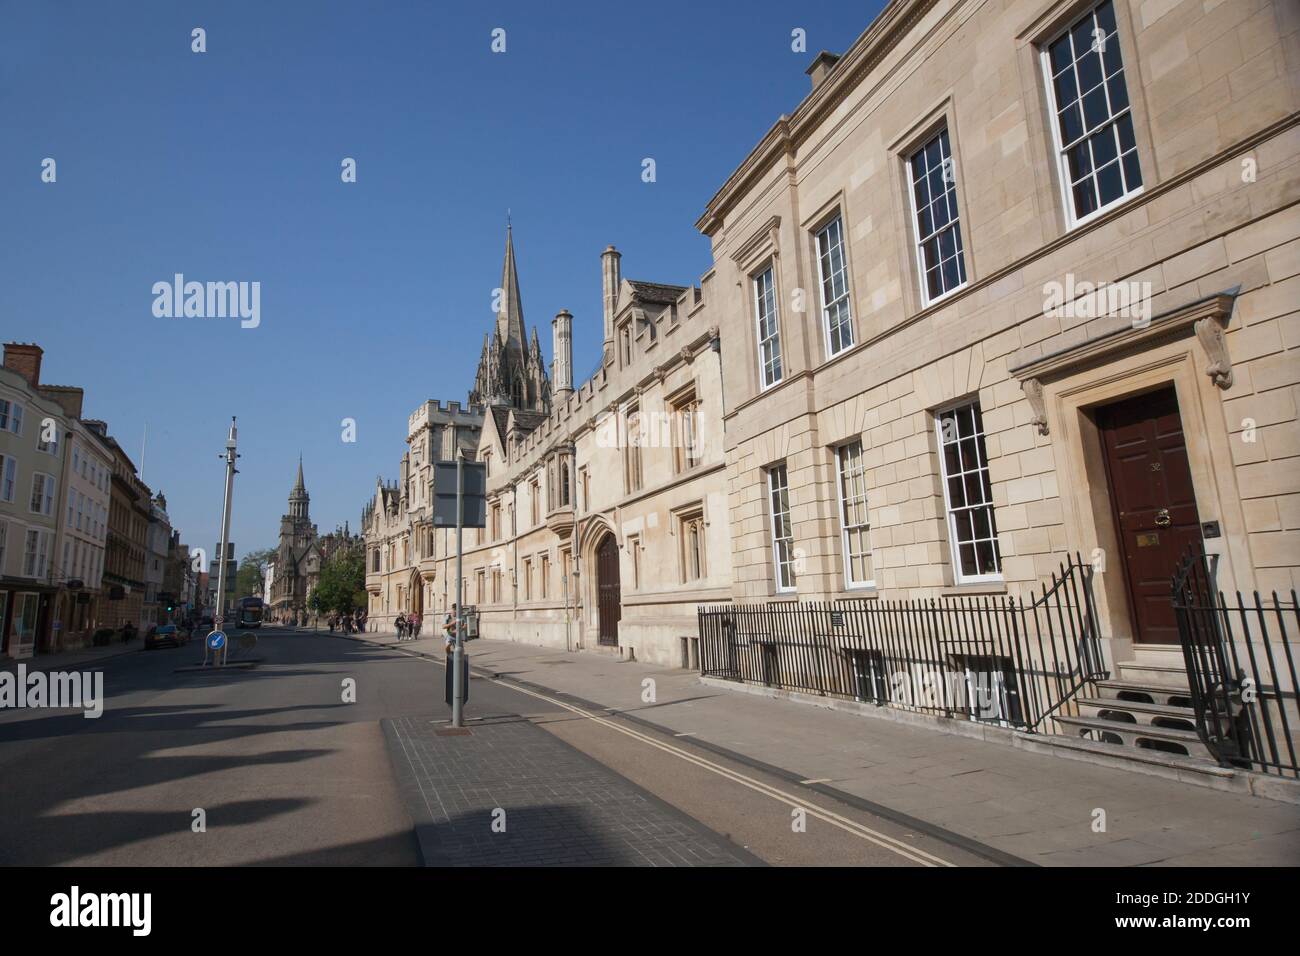 Views of The Oxford High Street and All Souls College in the UK, taken on the 15th of September 2020 Stock Photo